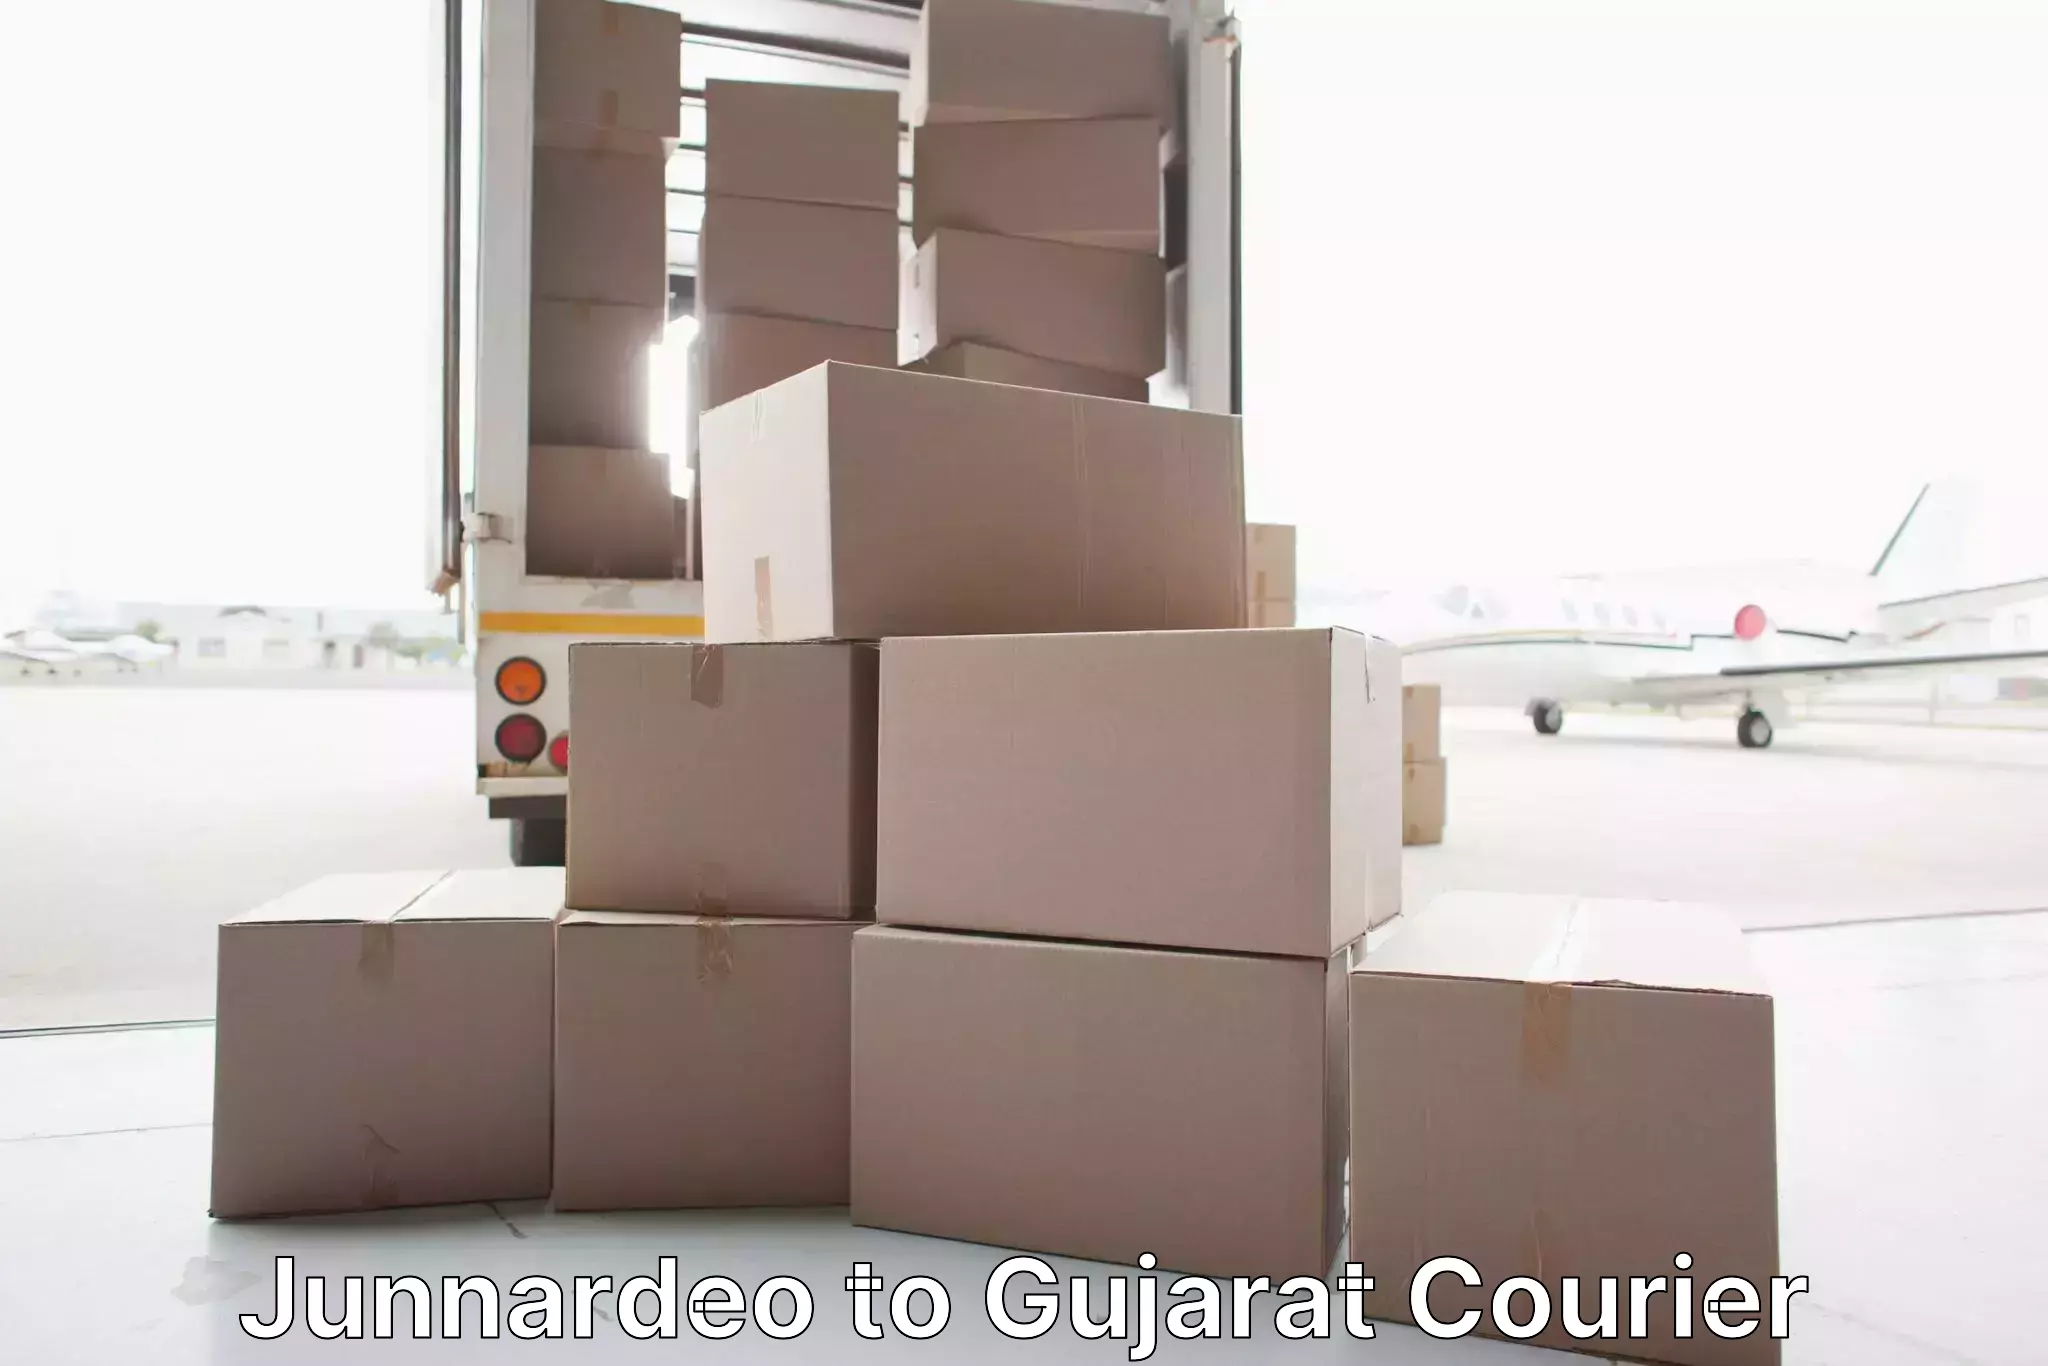 Furniture moving specialists in Junnardeo to Kandla Port